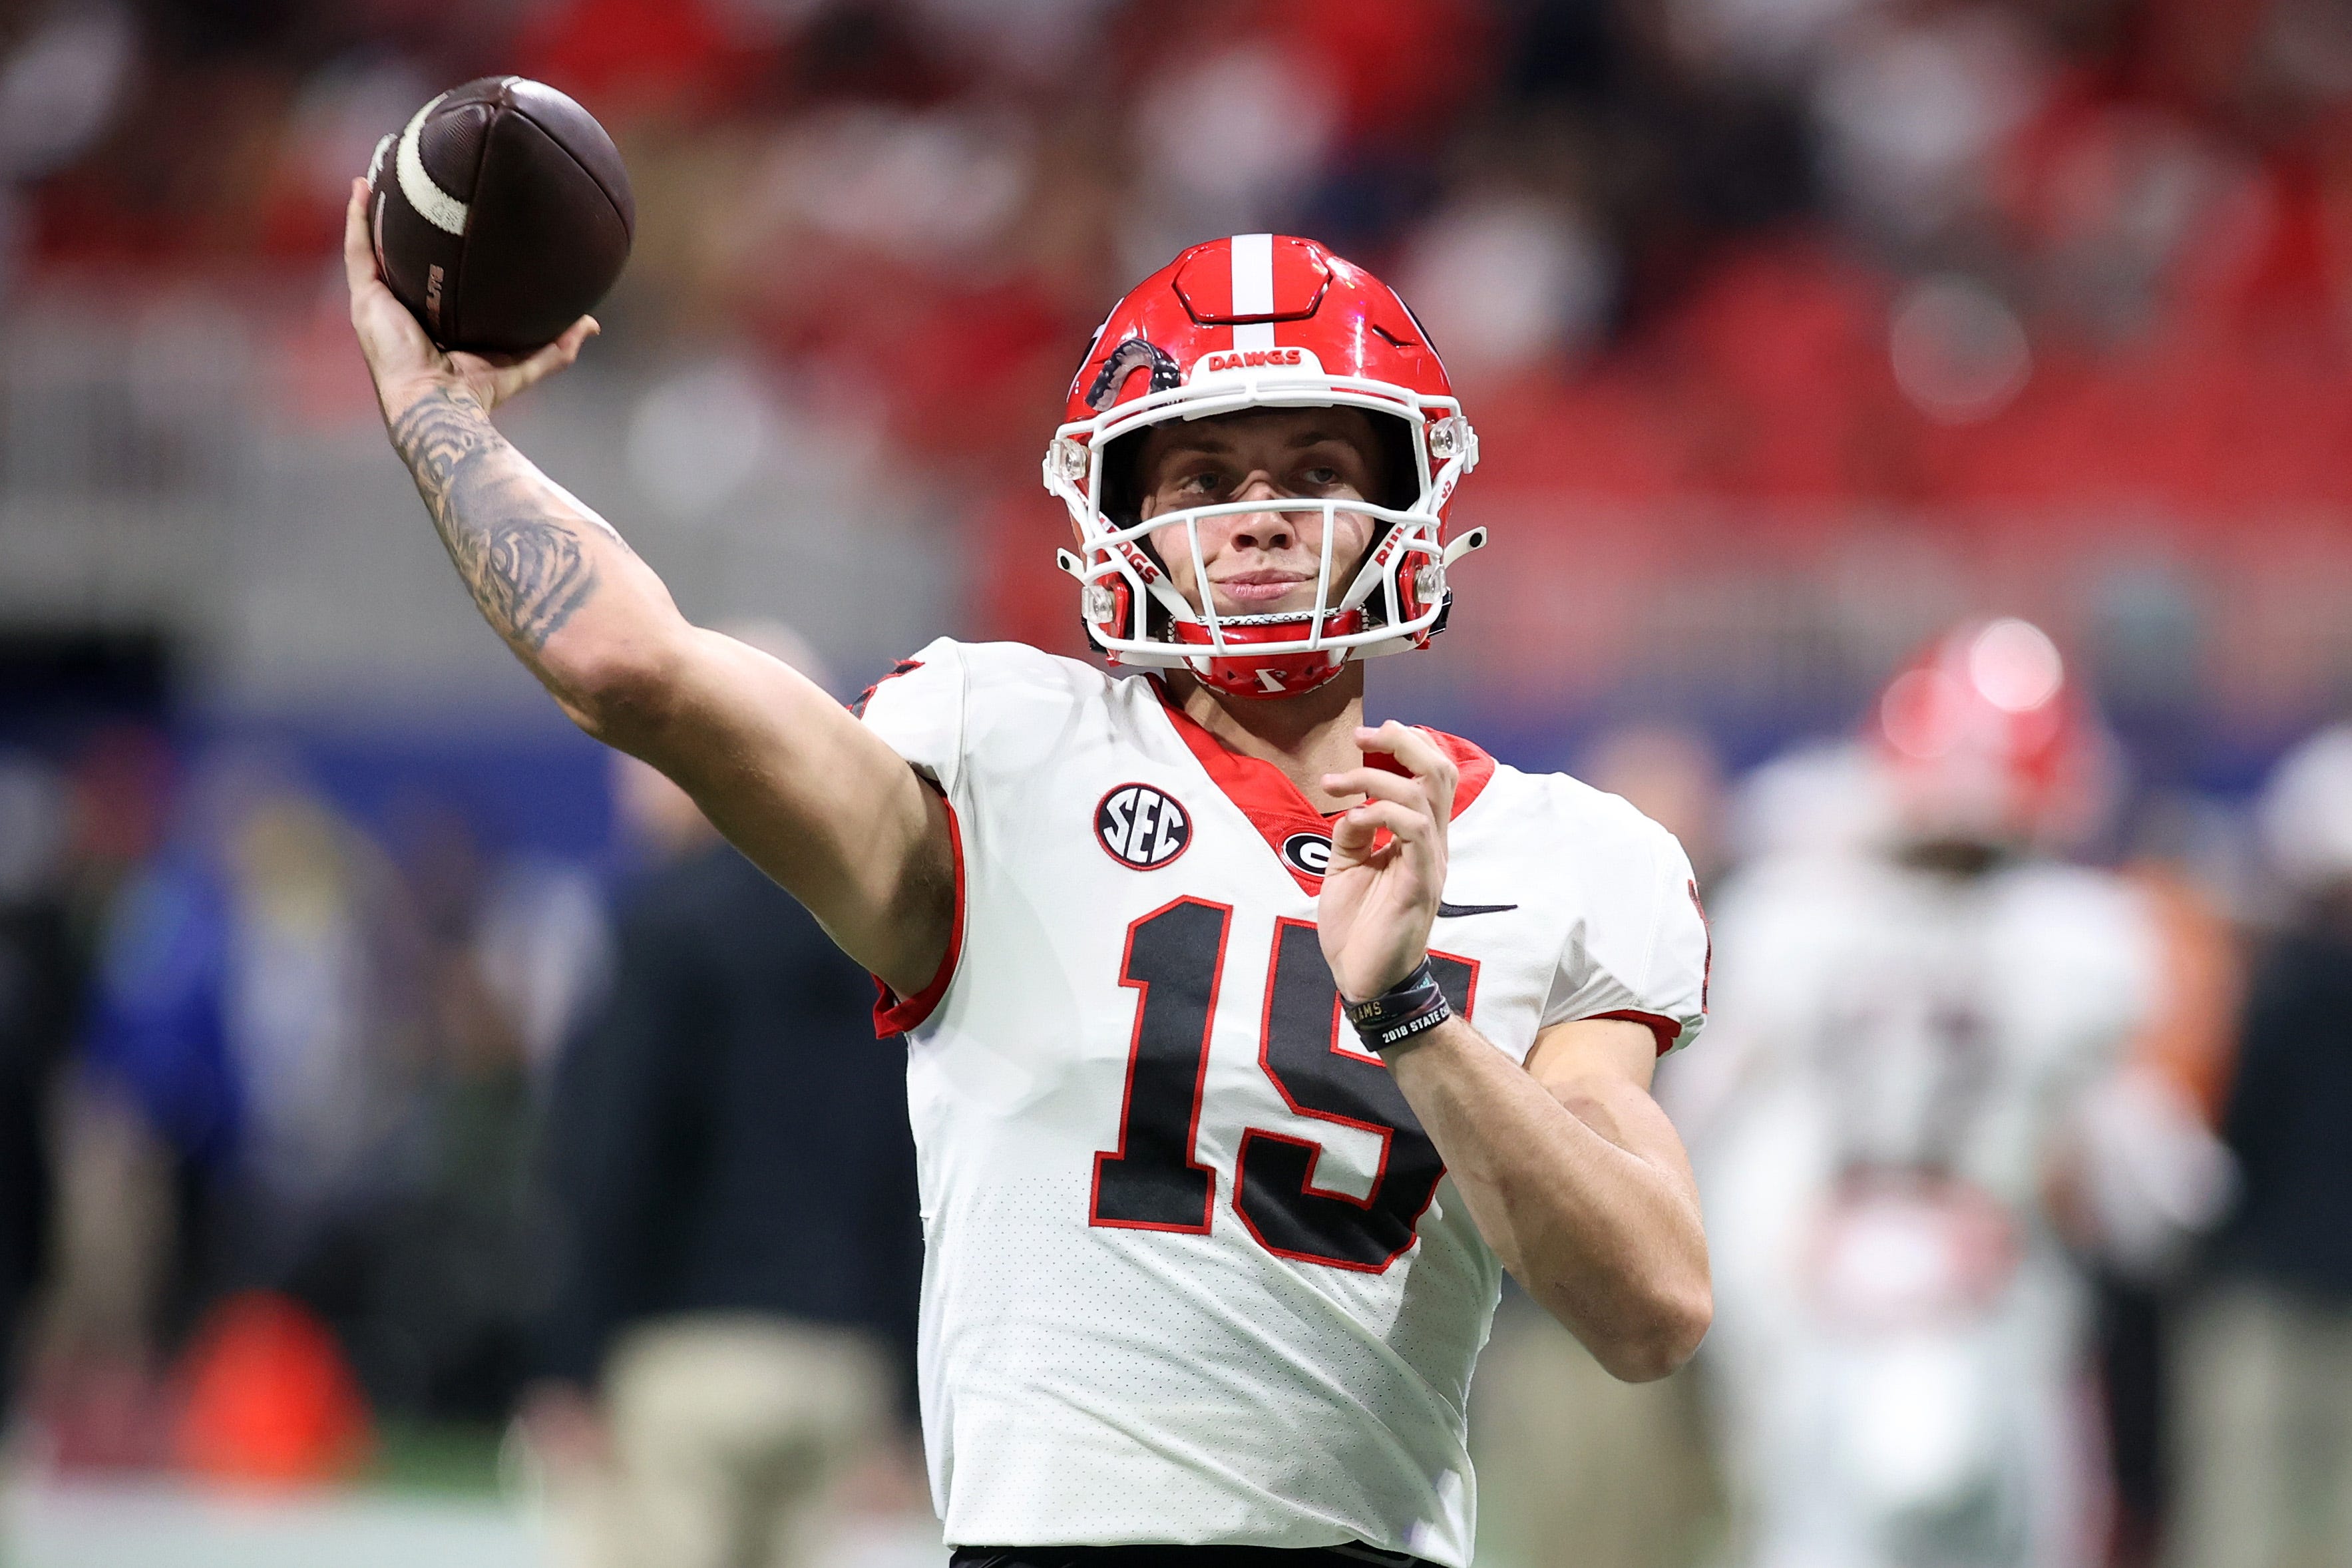 2025 nfl mock draft roundup: top 3 picks in way-too-early projections